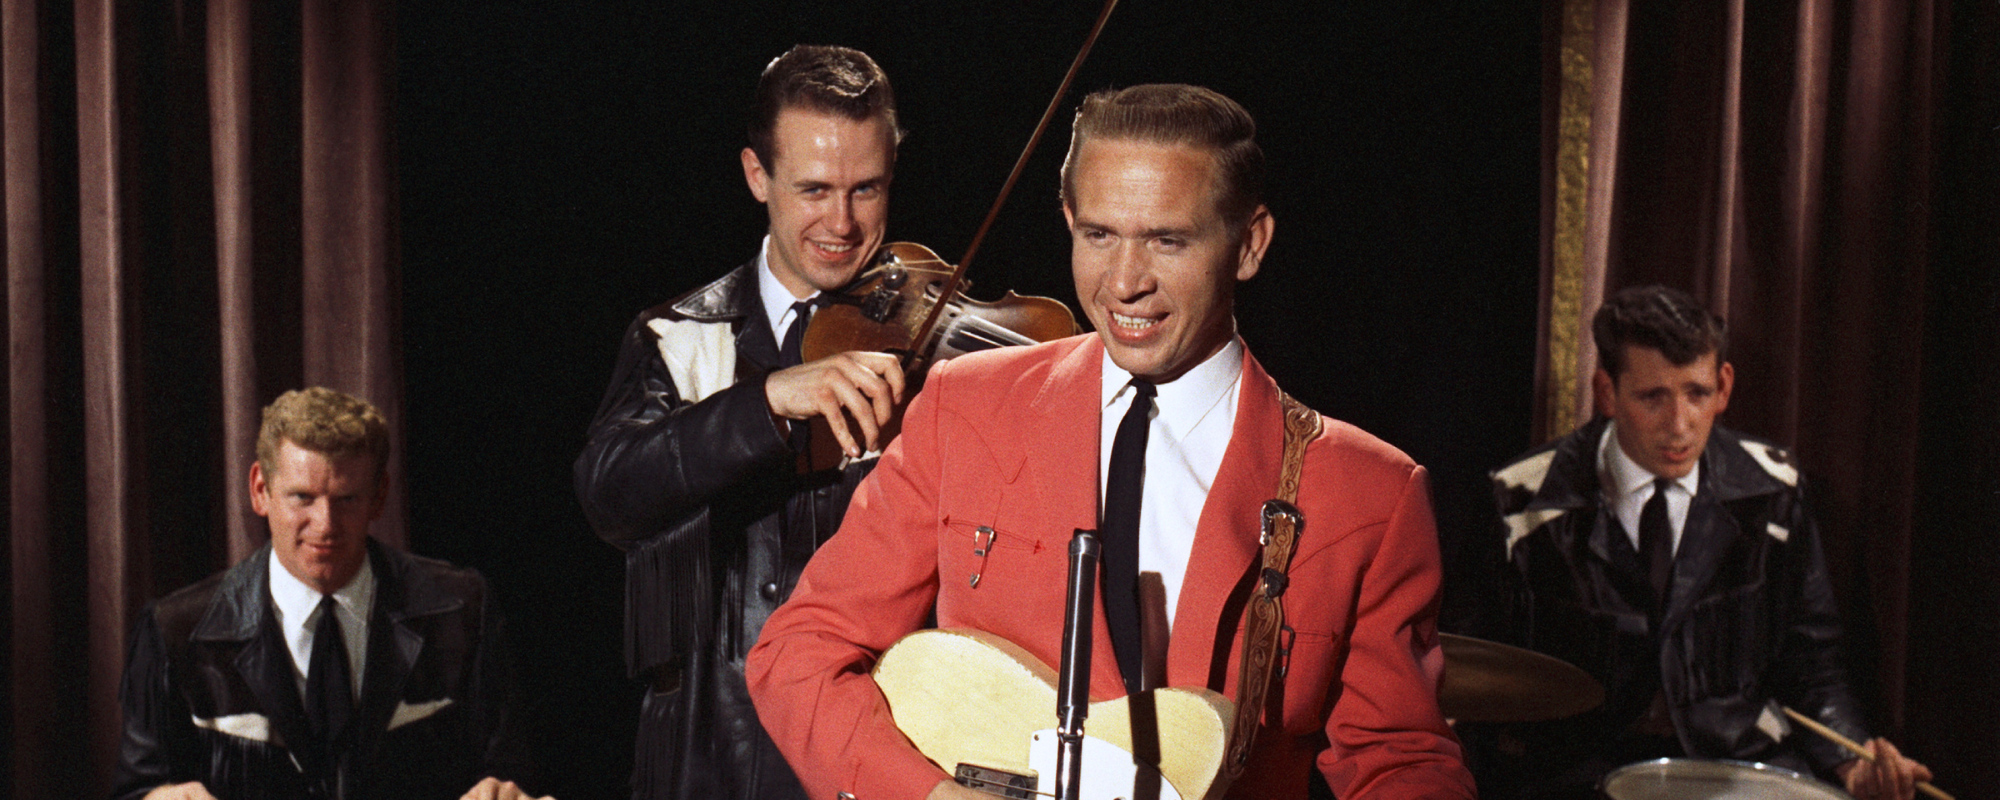 5 Fascinating Facts About the Most Devoted Country Music Purist Ever: Buck Owens